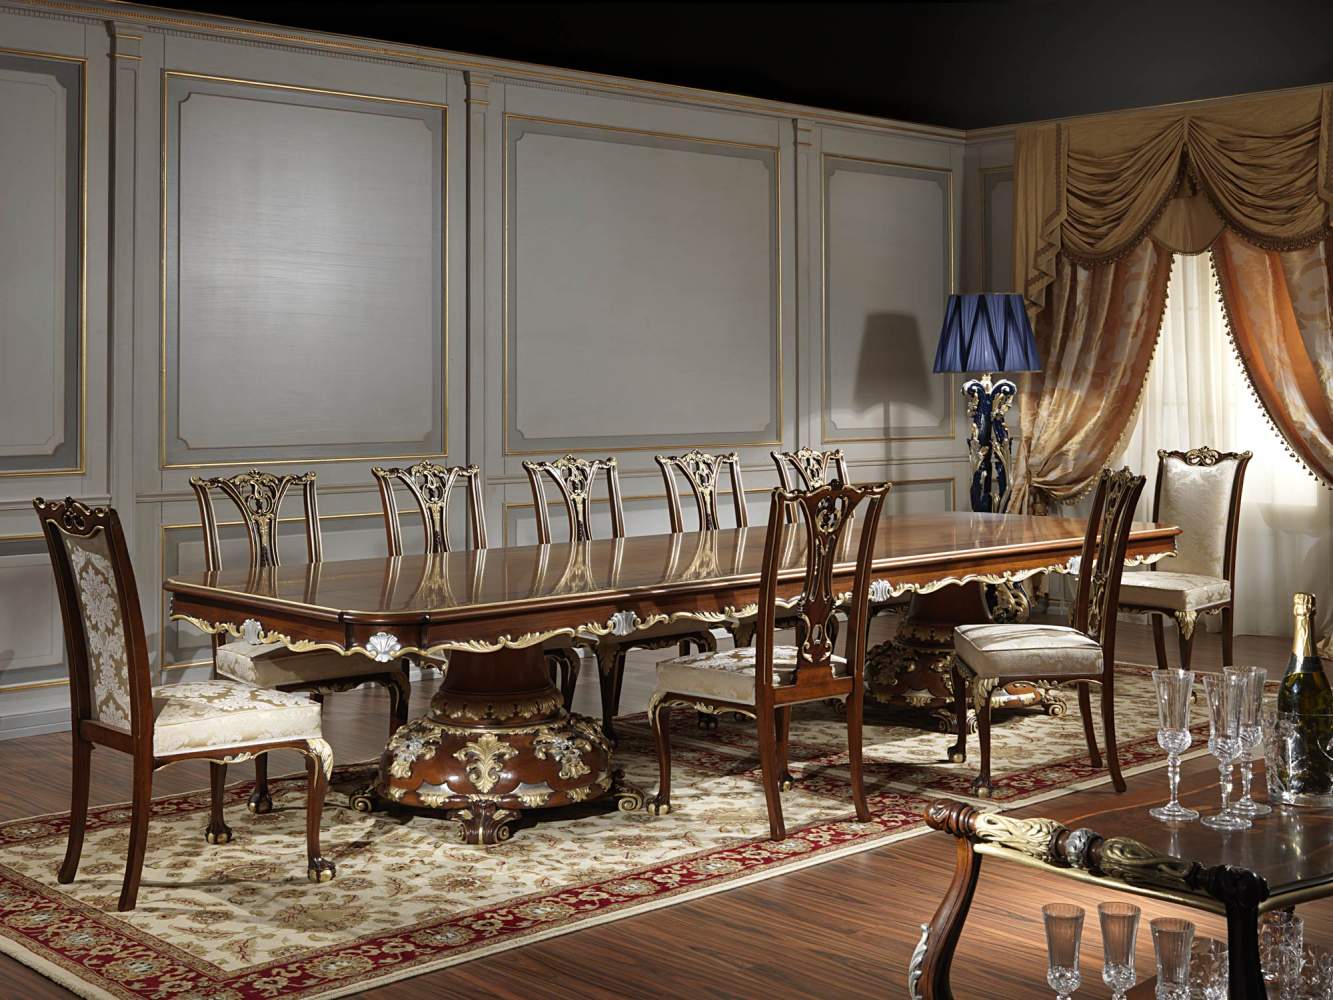 Classic meeting table in the style of Louis XV